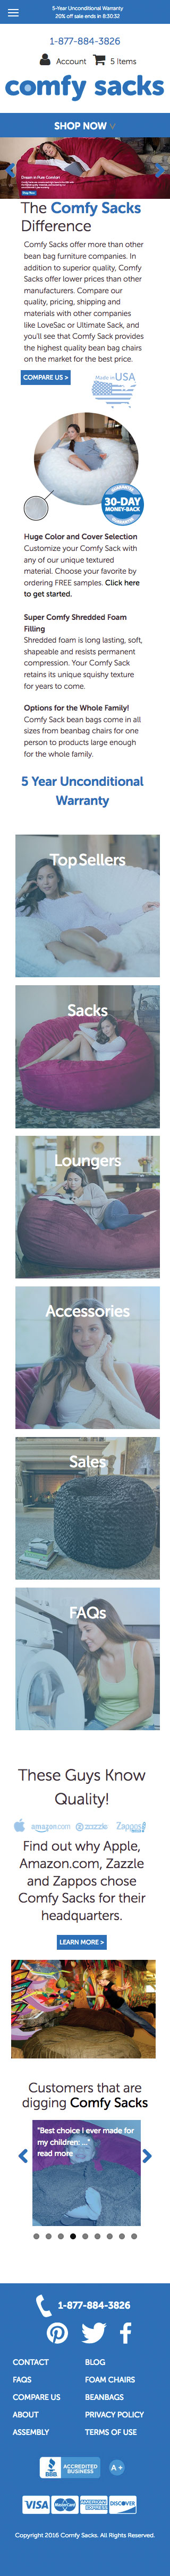 A mobile view of the entire Comfy Sacks Homepage